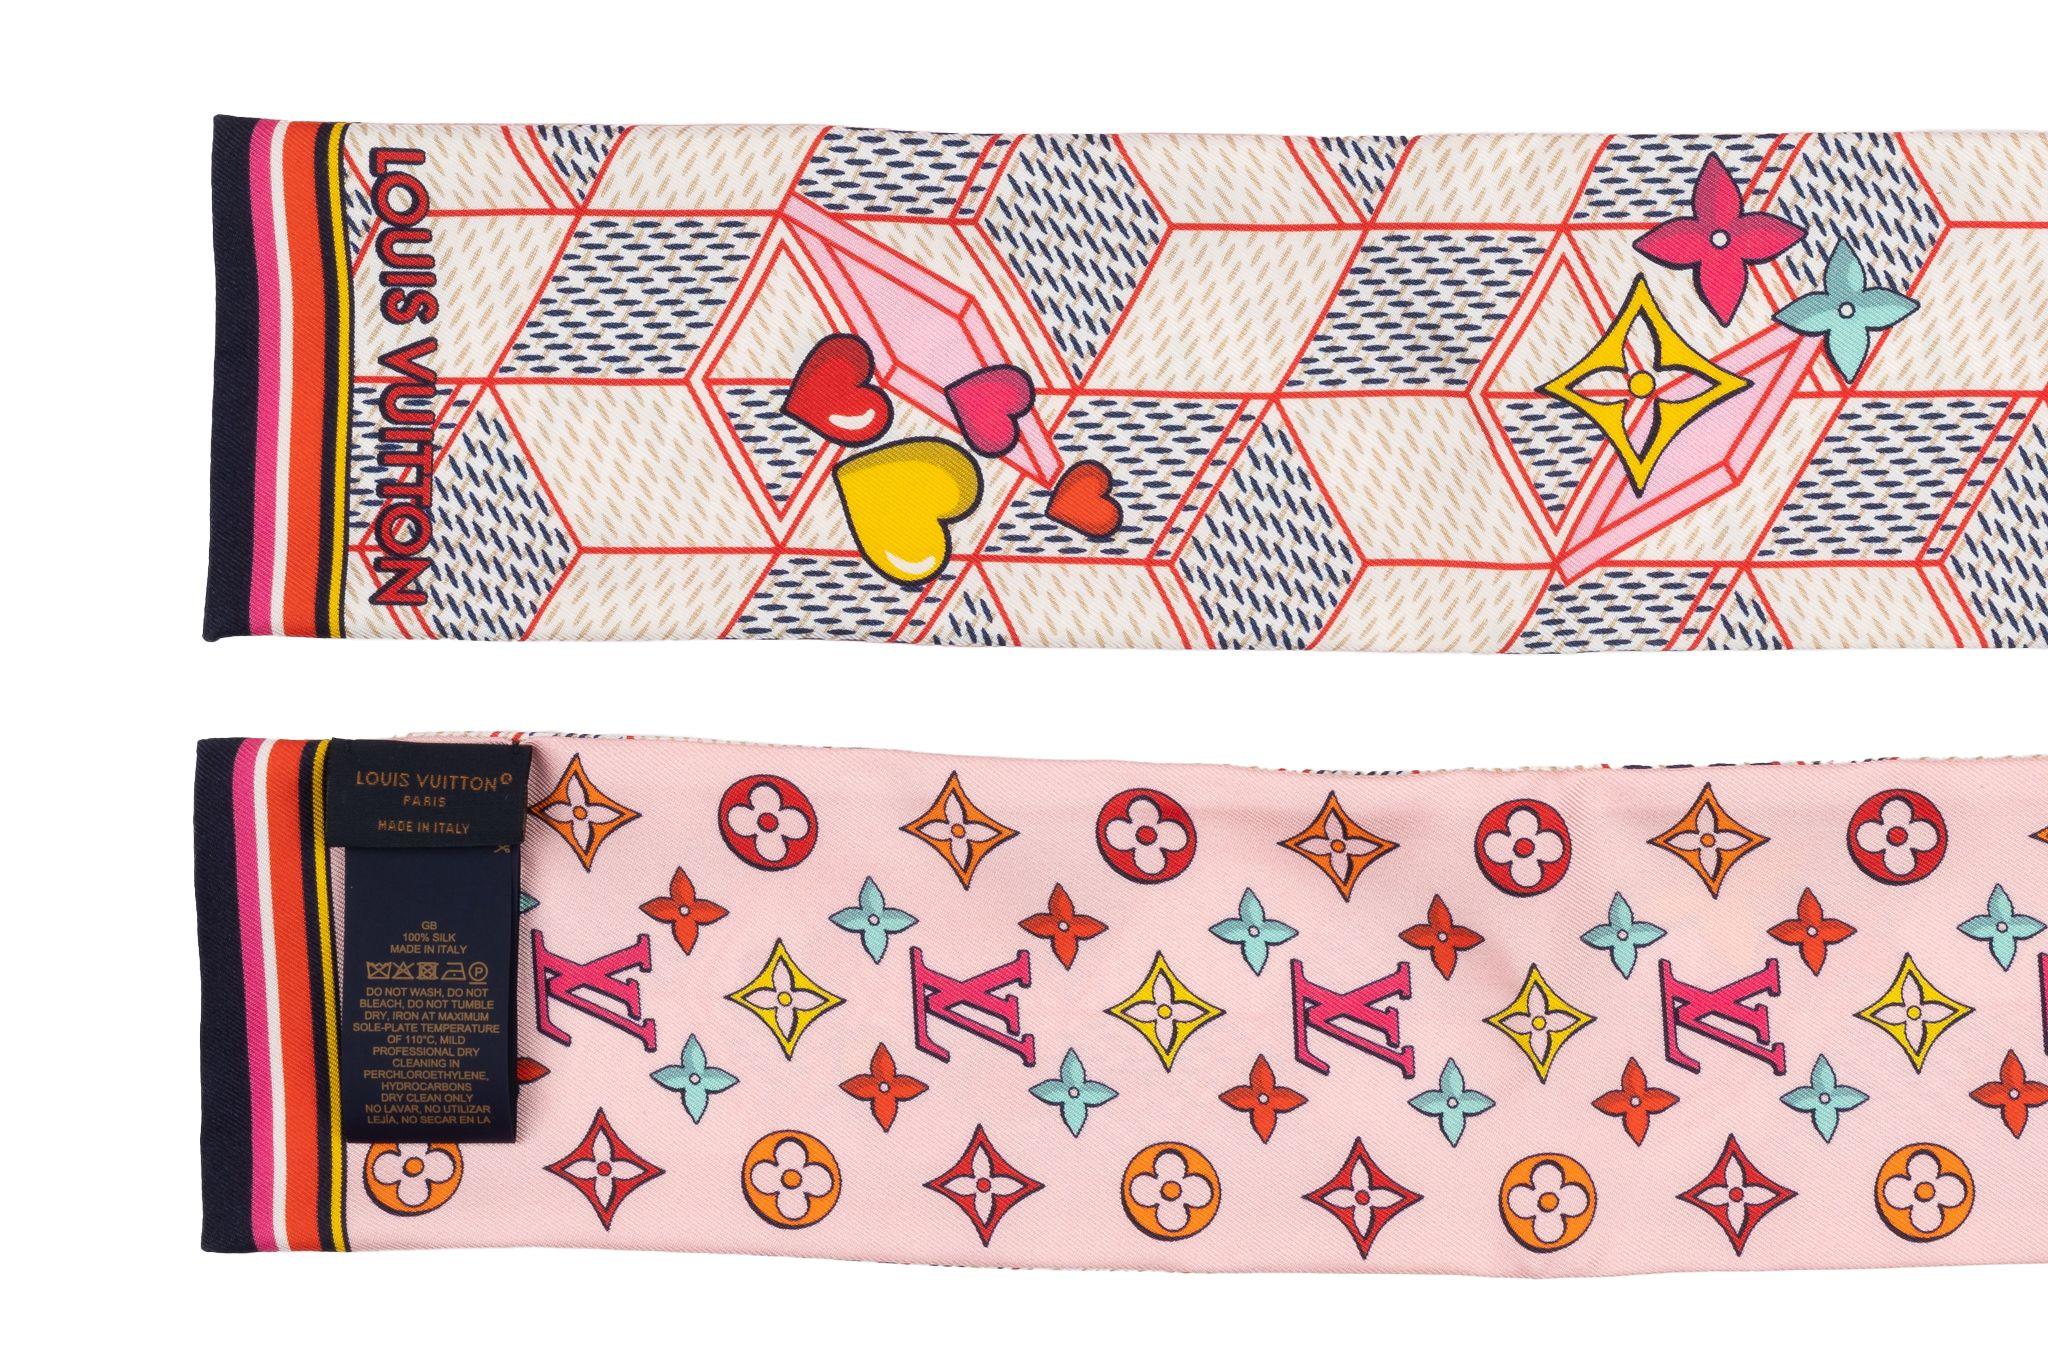 Louis Vuitton Silk Damier Pop Up Bandeau. This very chic 100% silk scarf features an attractive design of a colorful LV print on a pink background. The reverse side features printed shapes on a pink and white background. It's brand new and comes